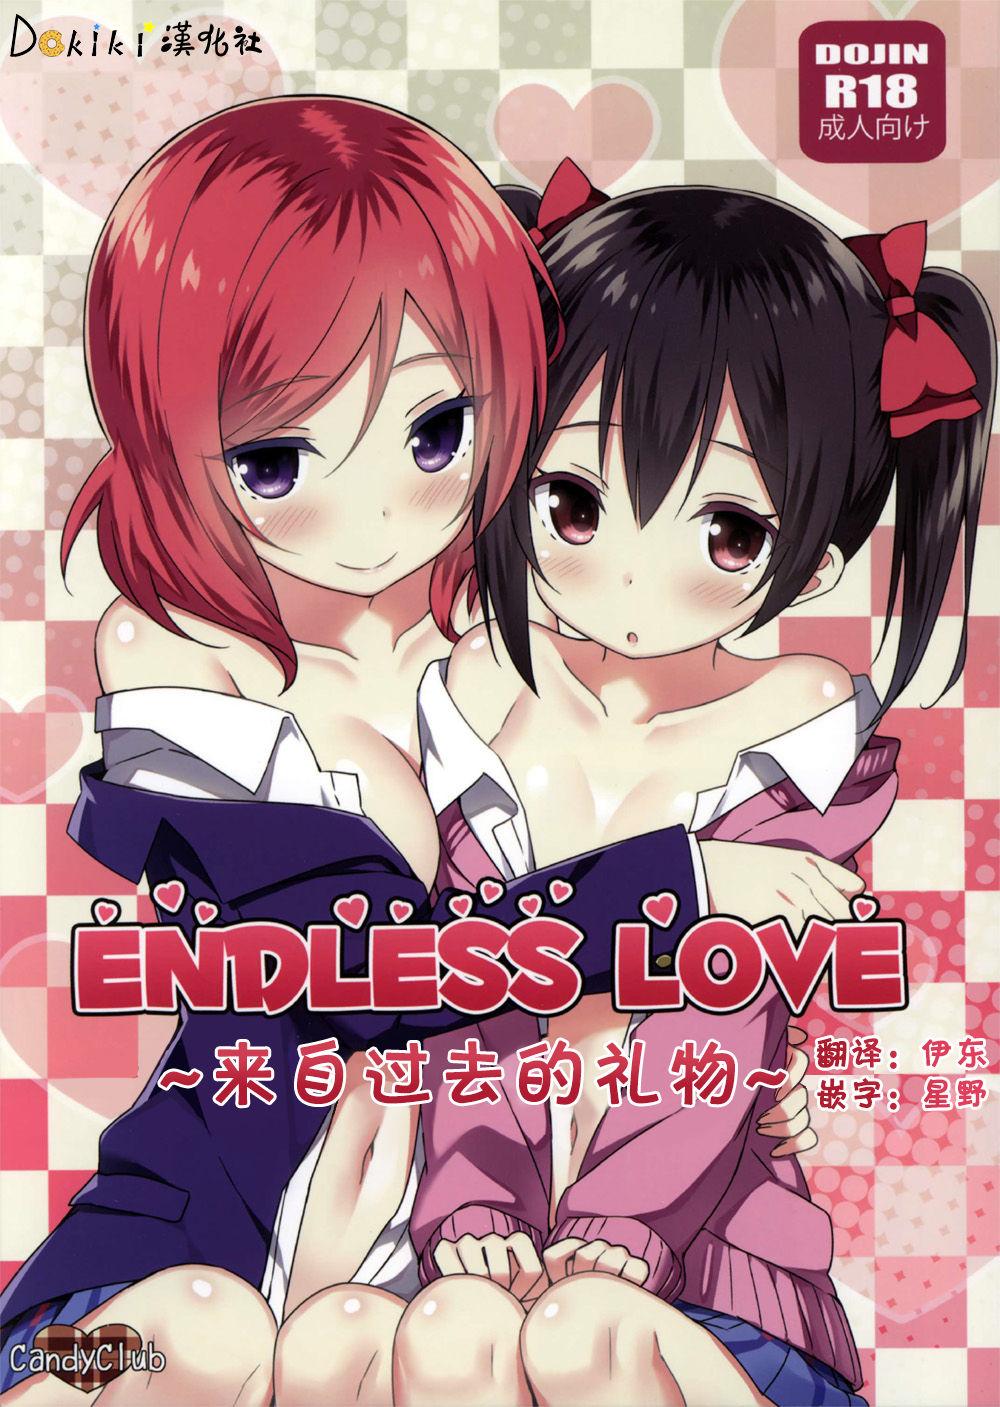 Exposed Endless Love - Love live Baile - Picture 1